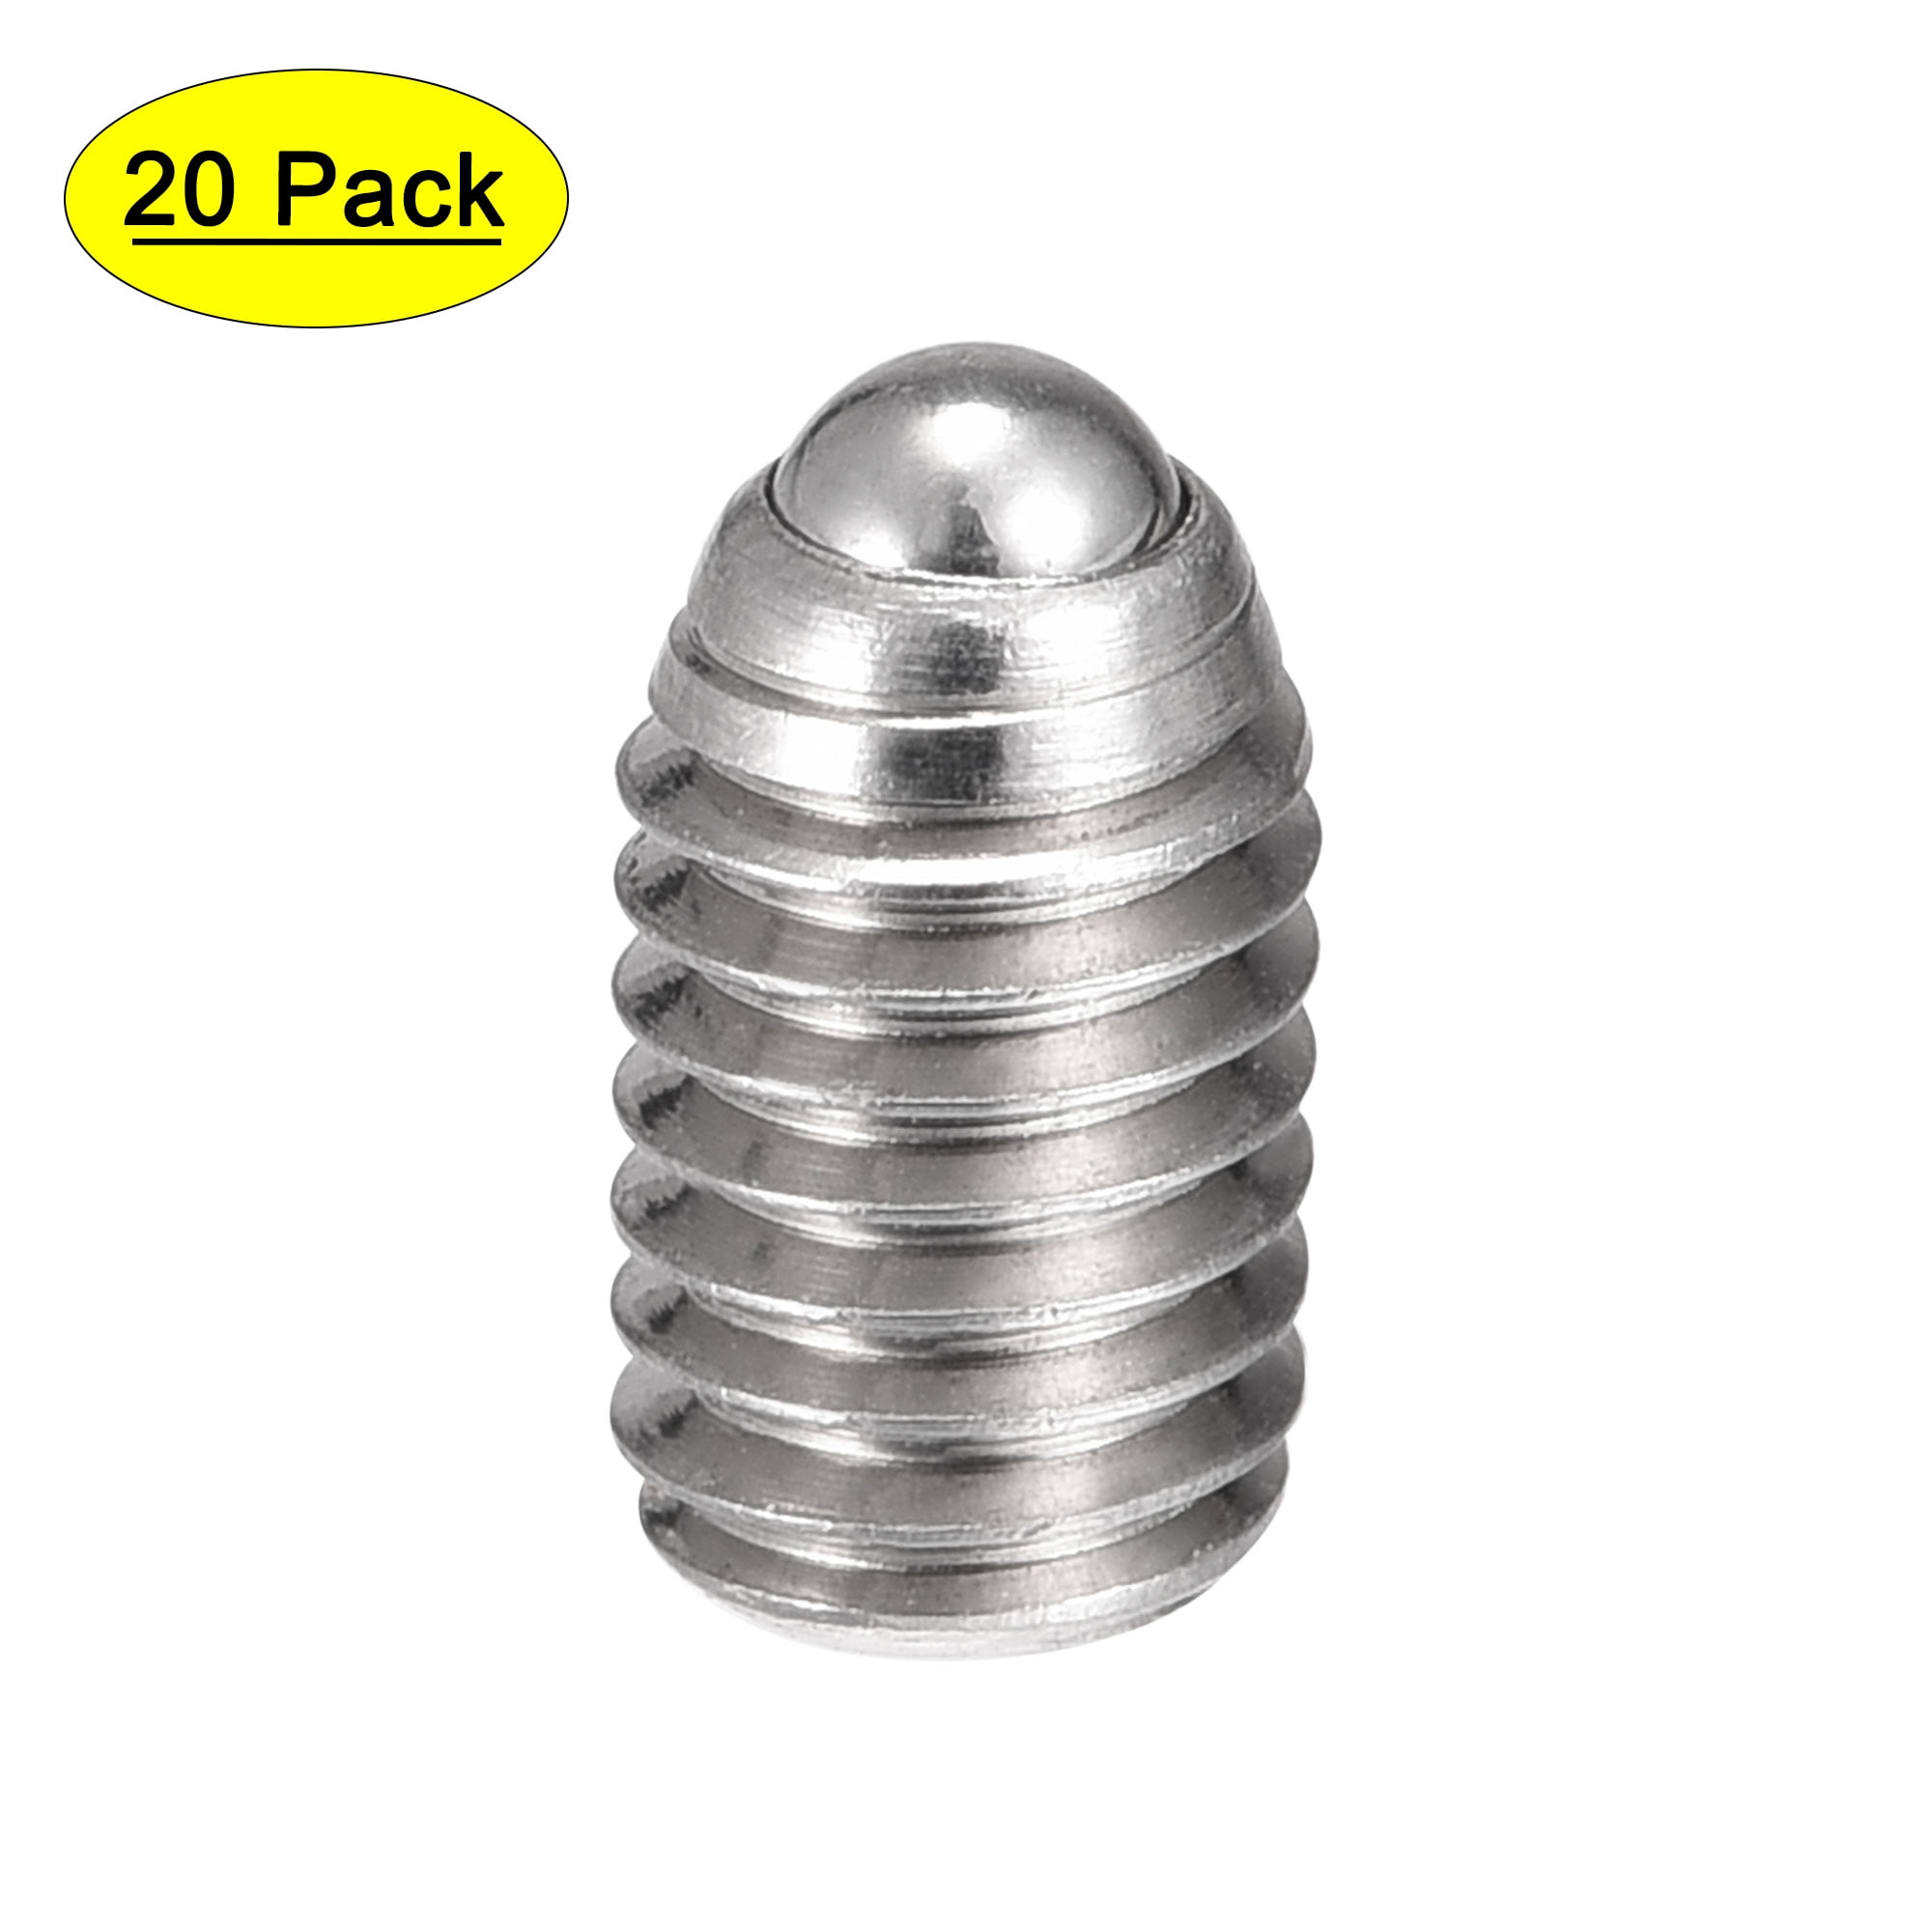 33 Feet 304 Stainless Corset Boning Spiral Steel Metal Boning with 32 Steel Boning Tips Structure and Form (5mm Wide), Silver